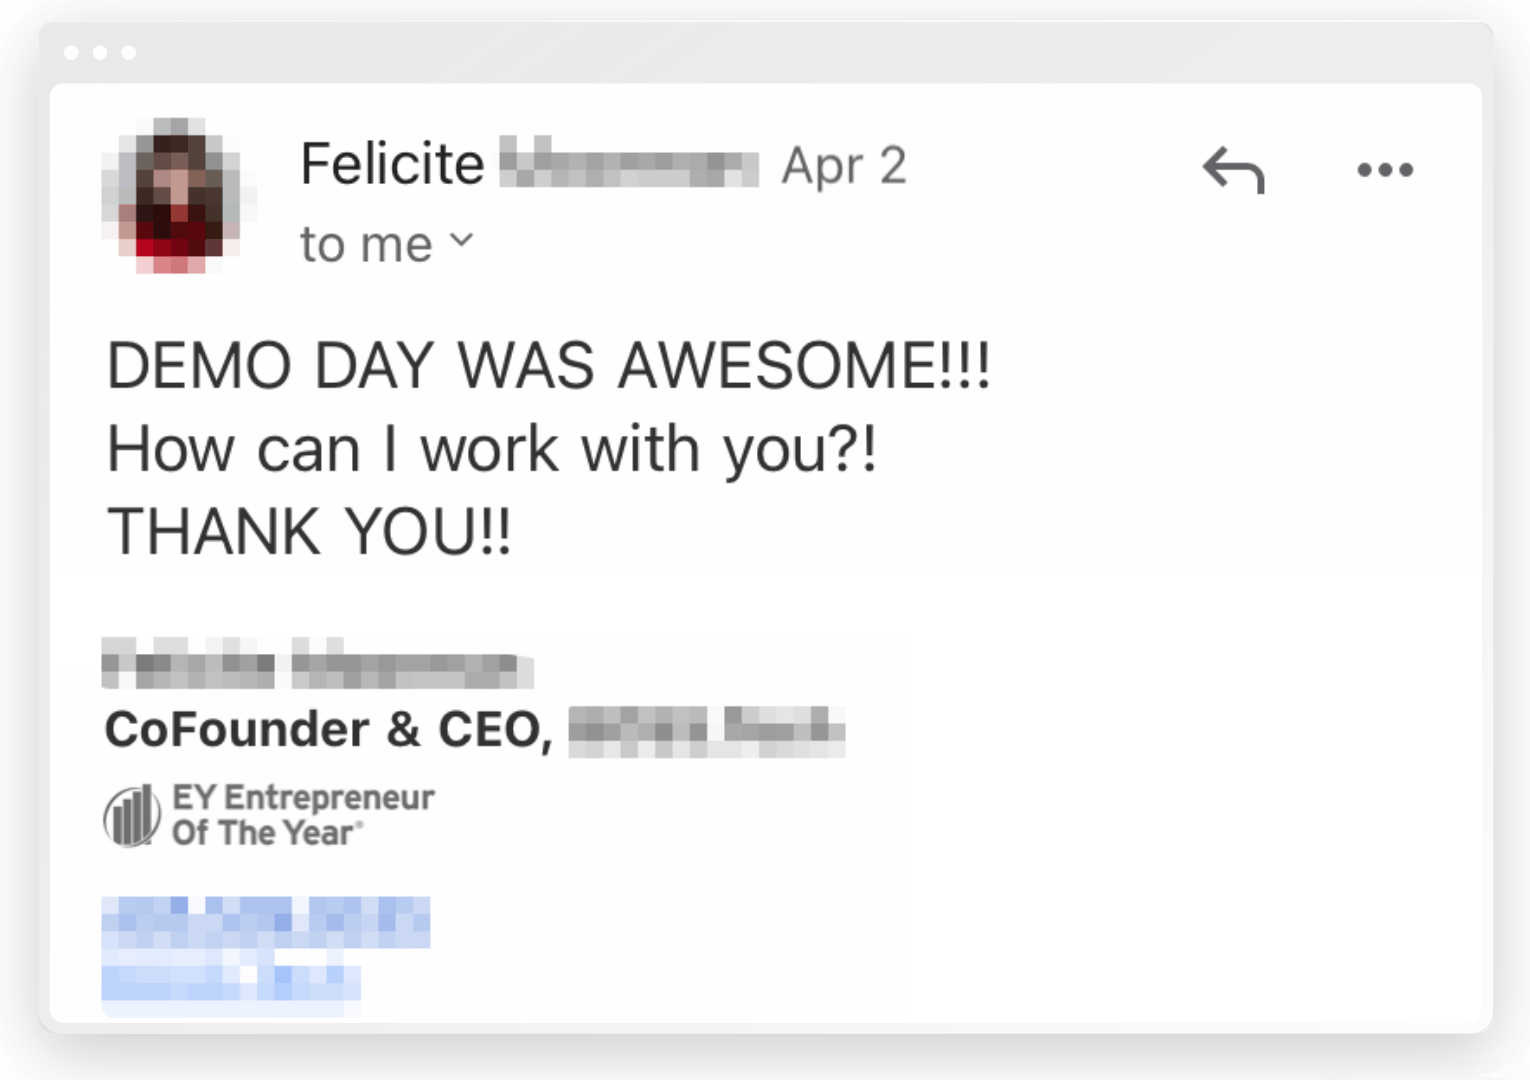 "Demo day was awesome!"